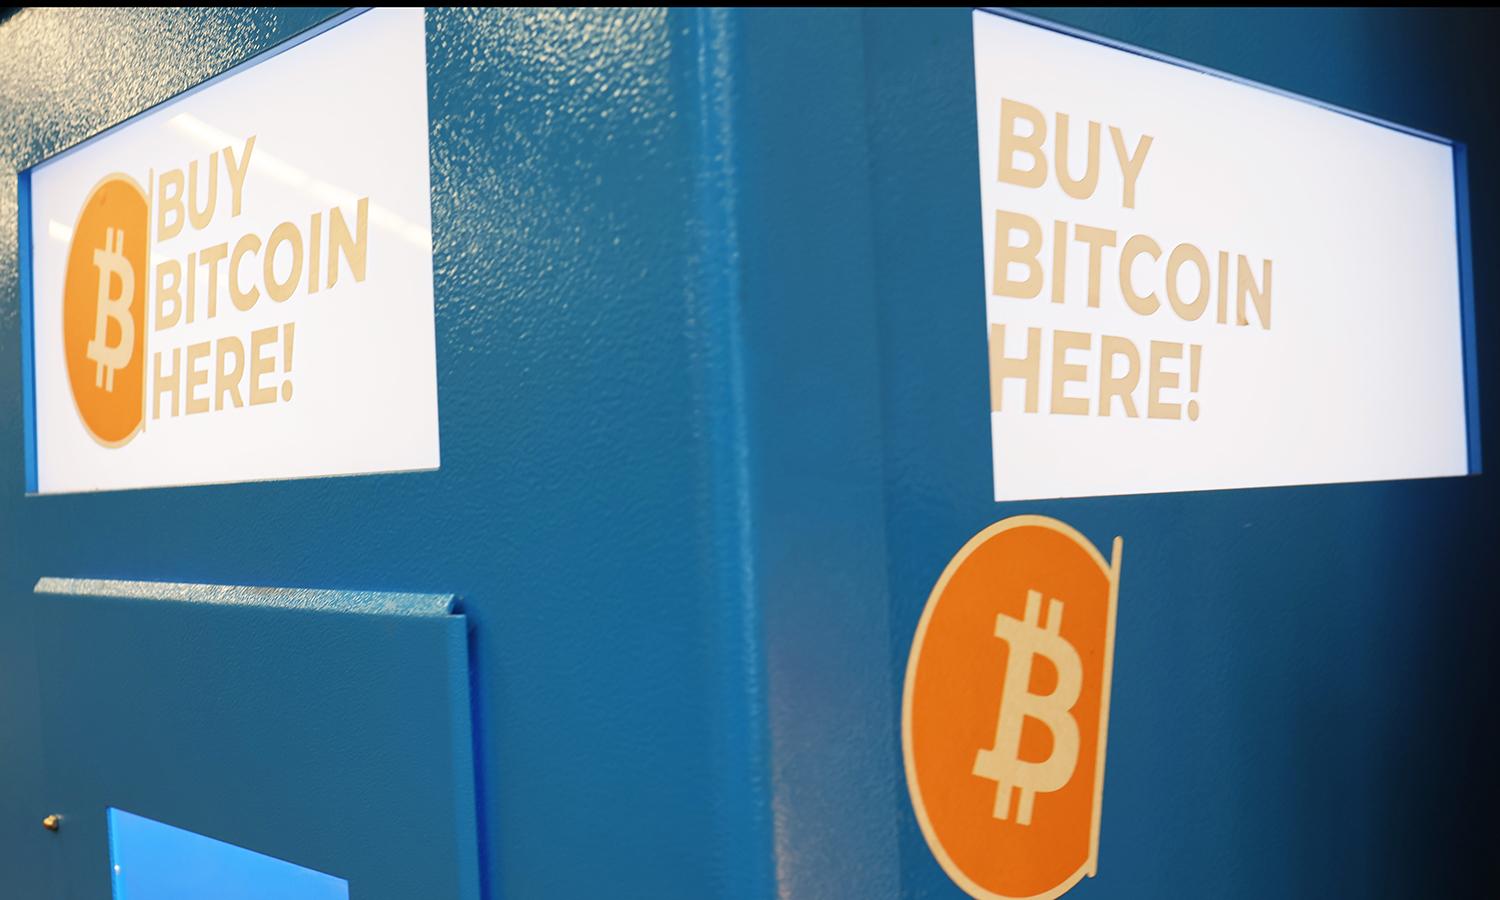 A blue ATM machine for Bitcoin is seen